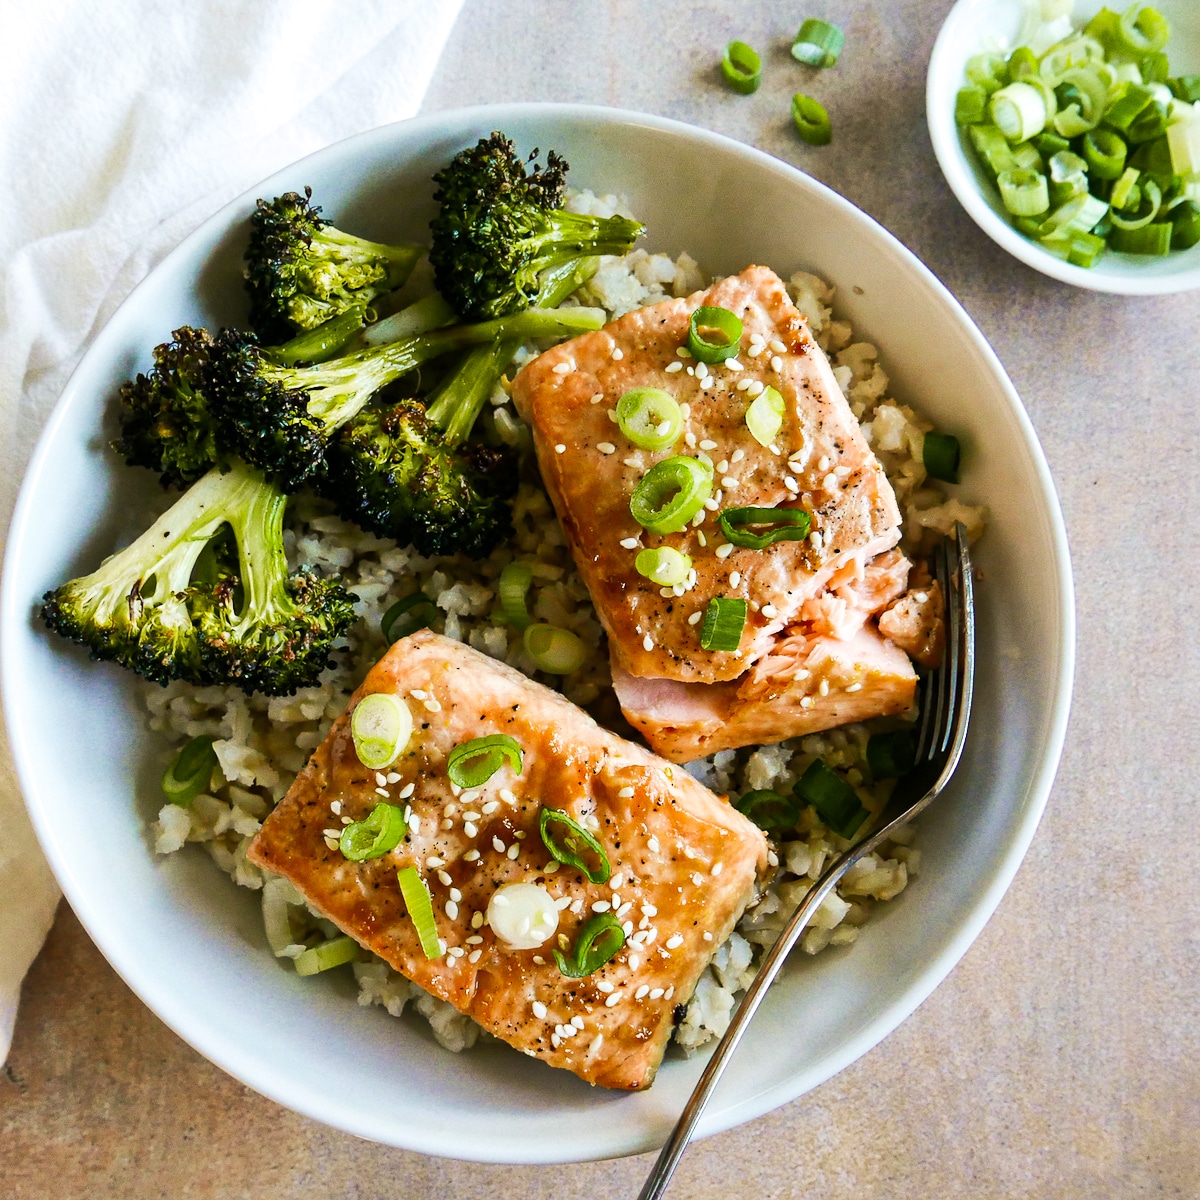 salmon with miso, broccoli, and rice in a bowl.